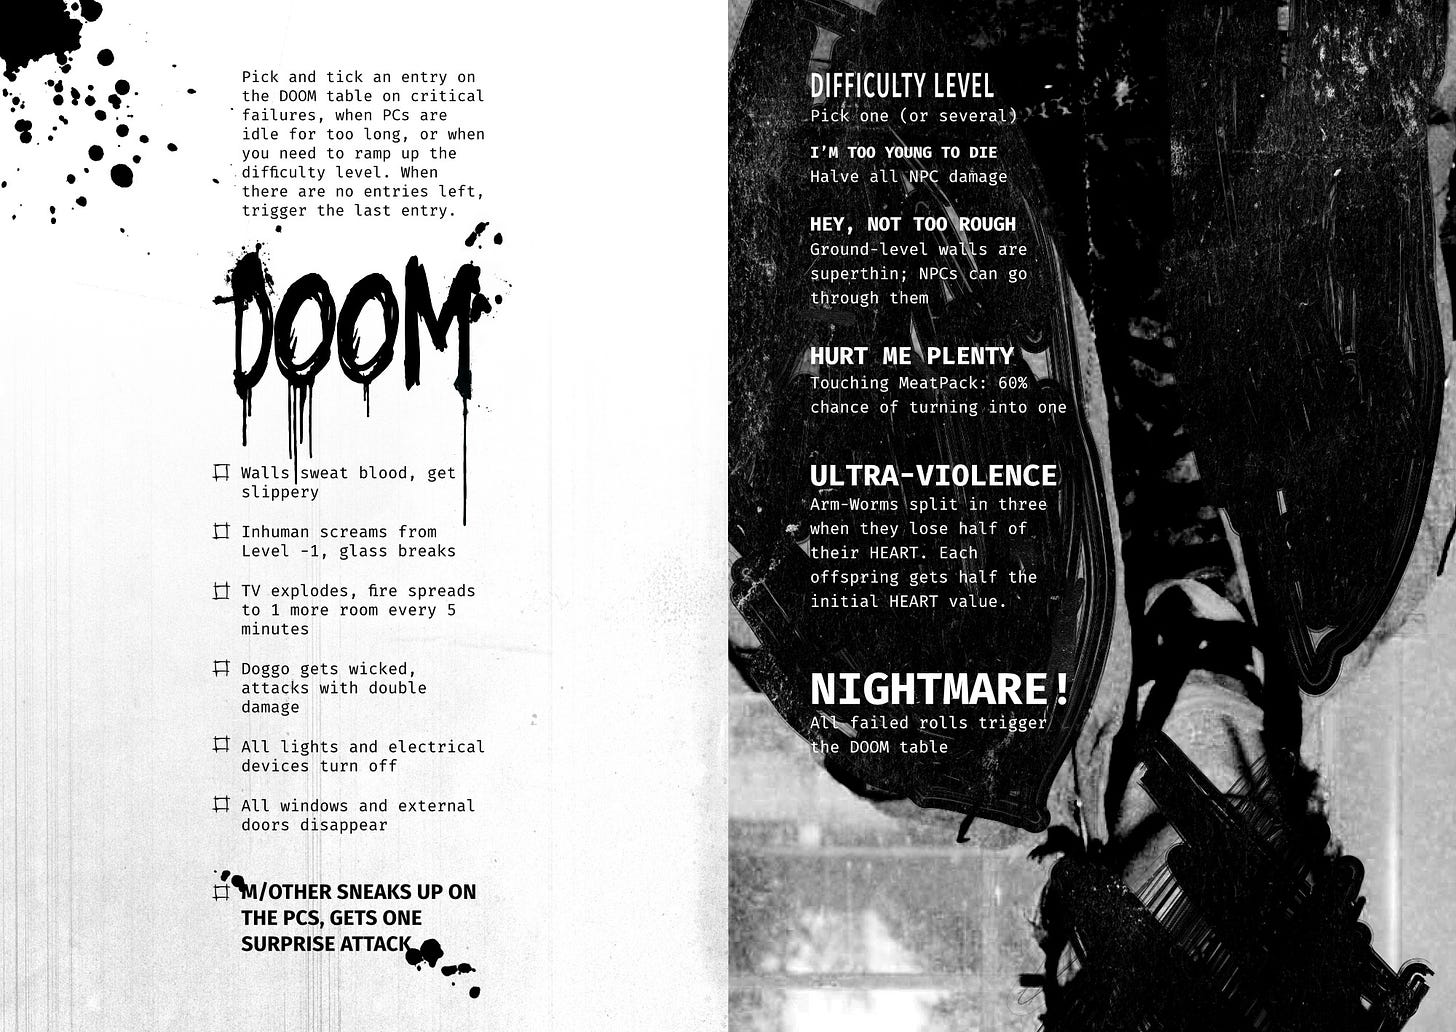 A two-page spread. On the left hand side, a DOOM table depicting an escalating list of bad things that can happen as players make critical failures, loiter, or when things get too easy. On the right hand page, a man hangs upside down with a face that has been scribbled over with a marker. Written on top of the image is an ascending list of difficulty modes for the game.